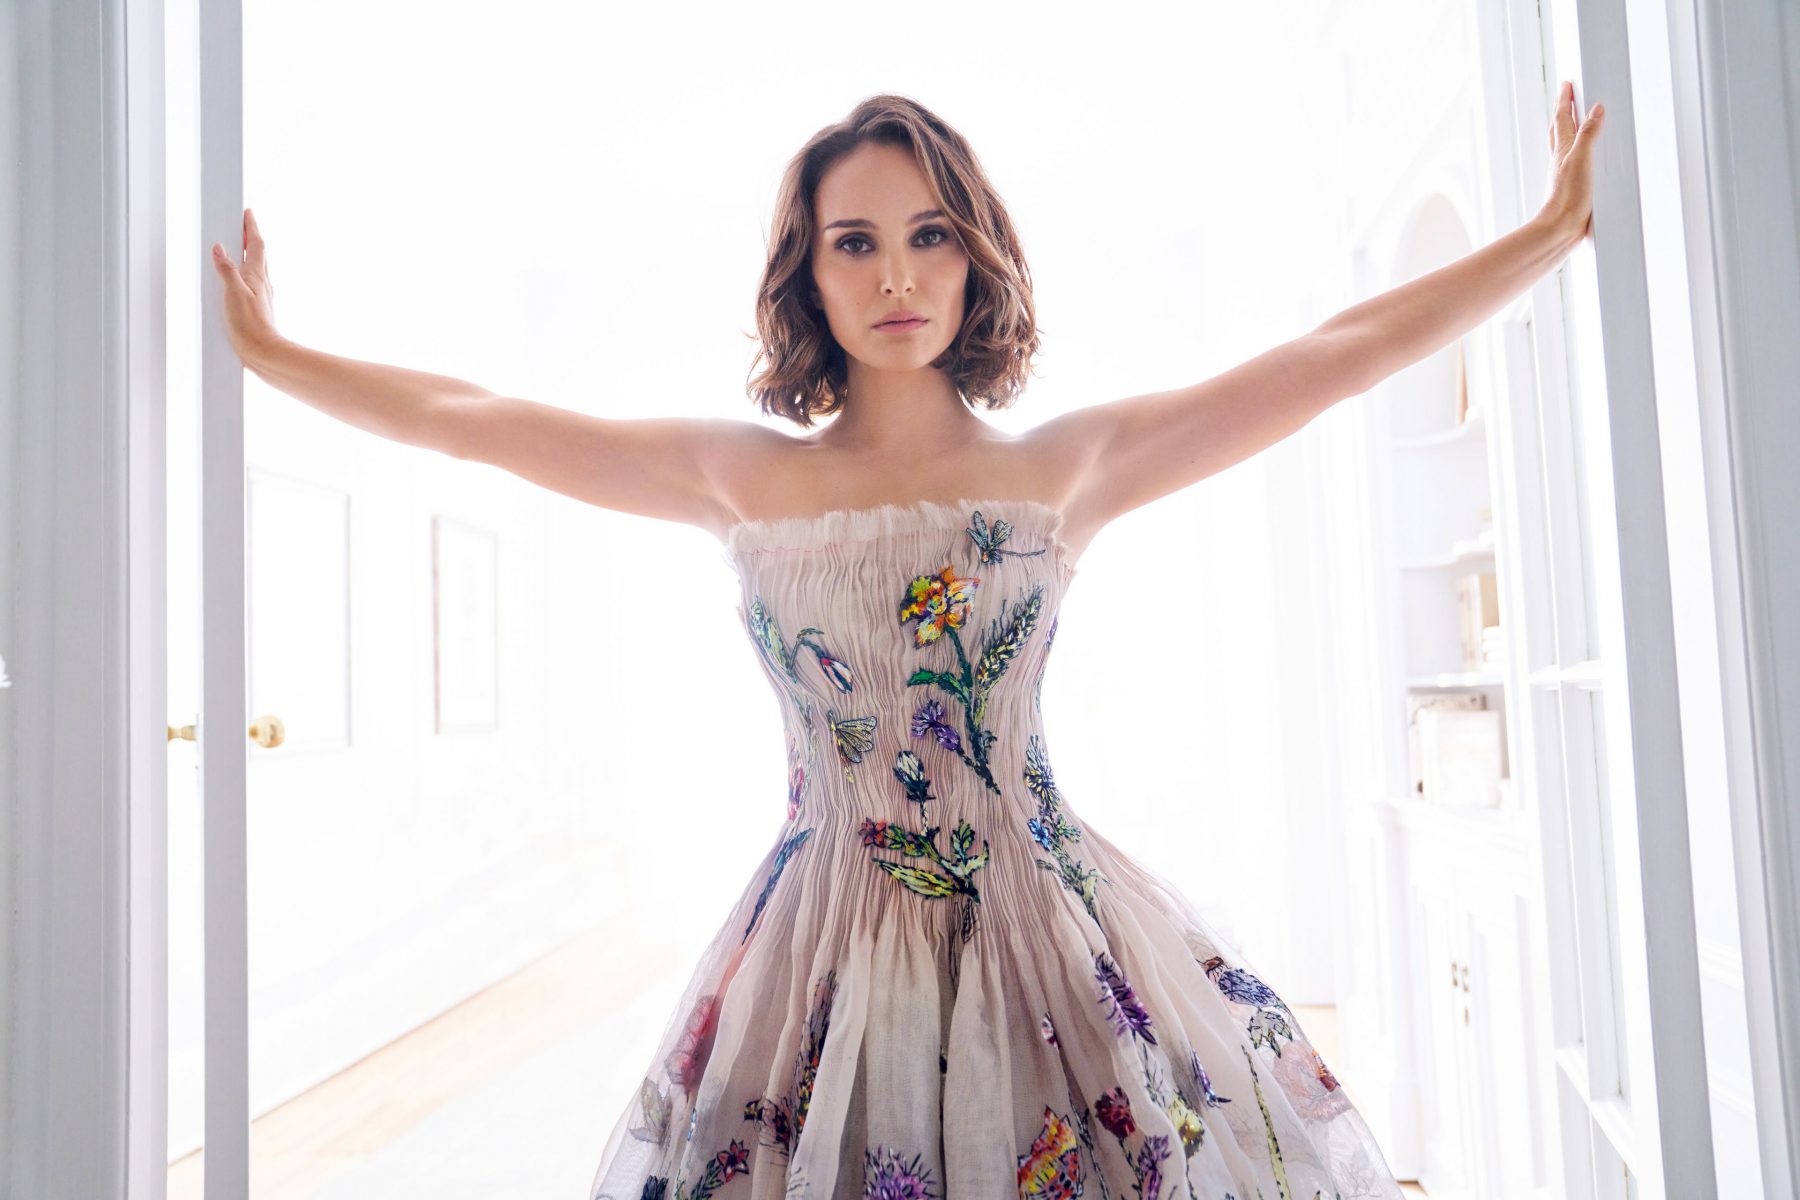 Natalie Portman wears a haute couture dress designed by sir Christian Dior himself